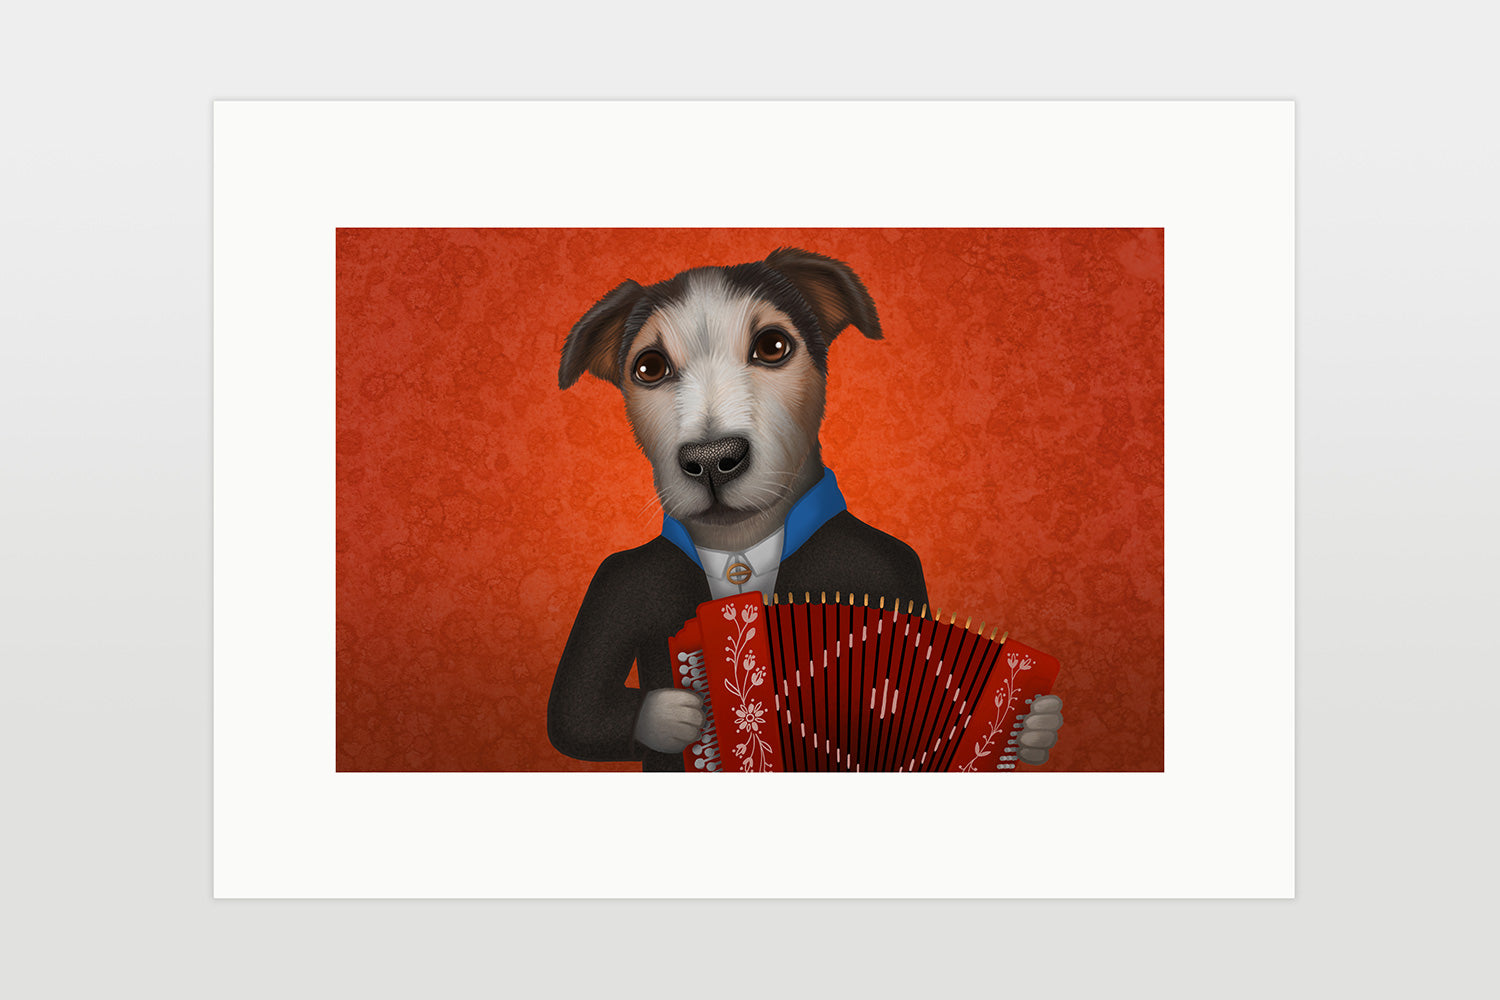 Print "With some effort, beauty comes along" (Jack Russell Terrier)